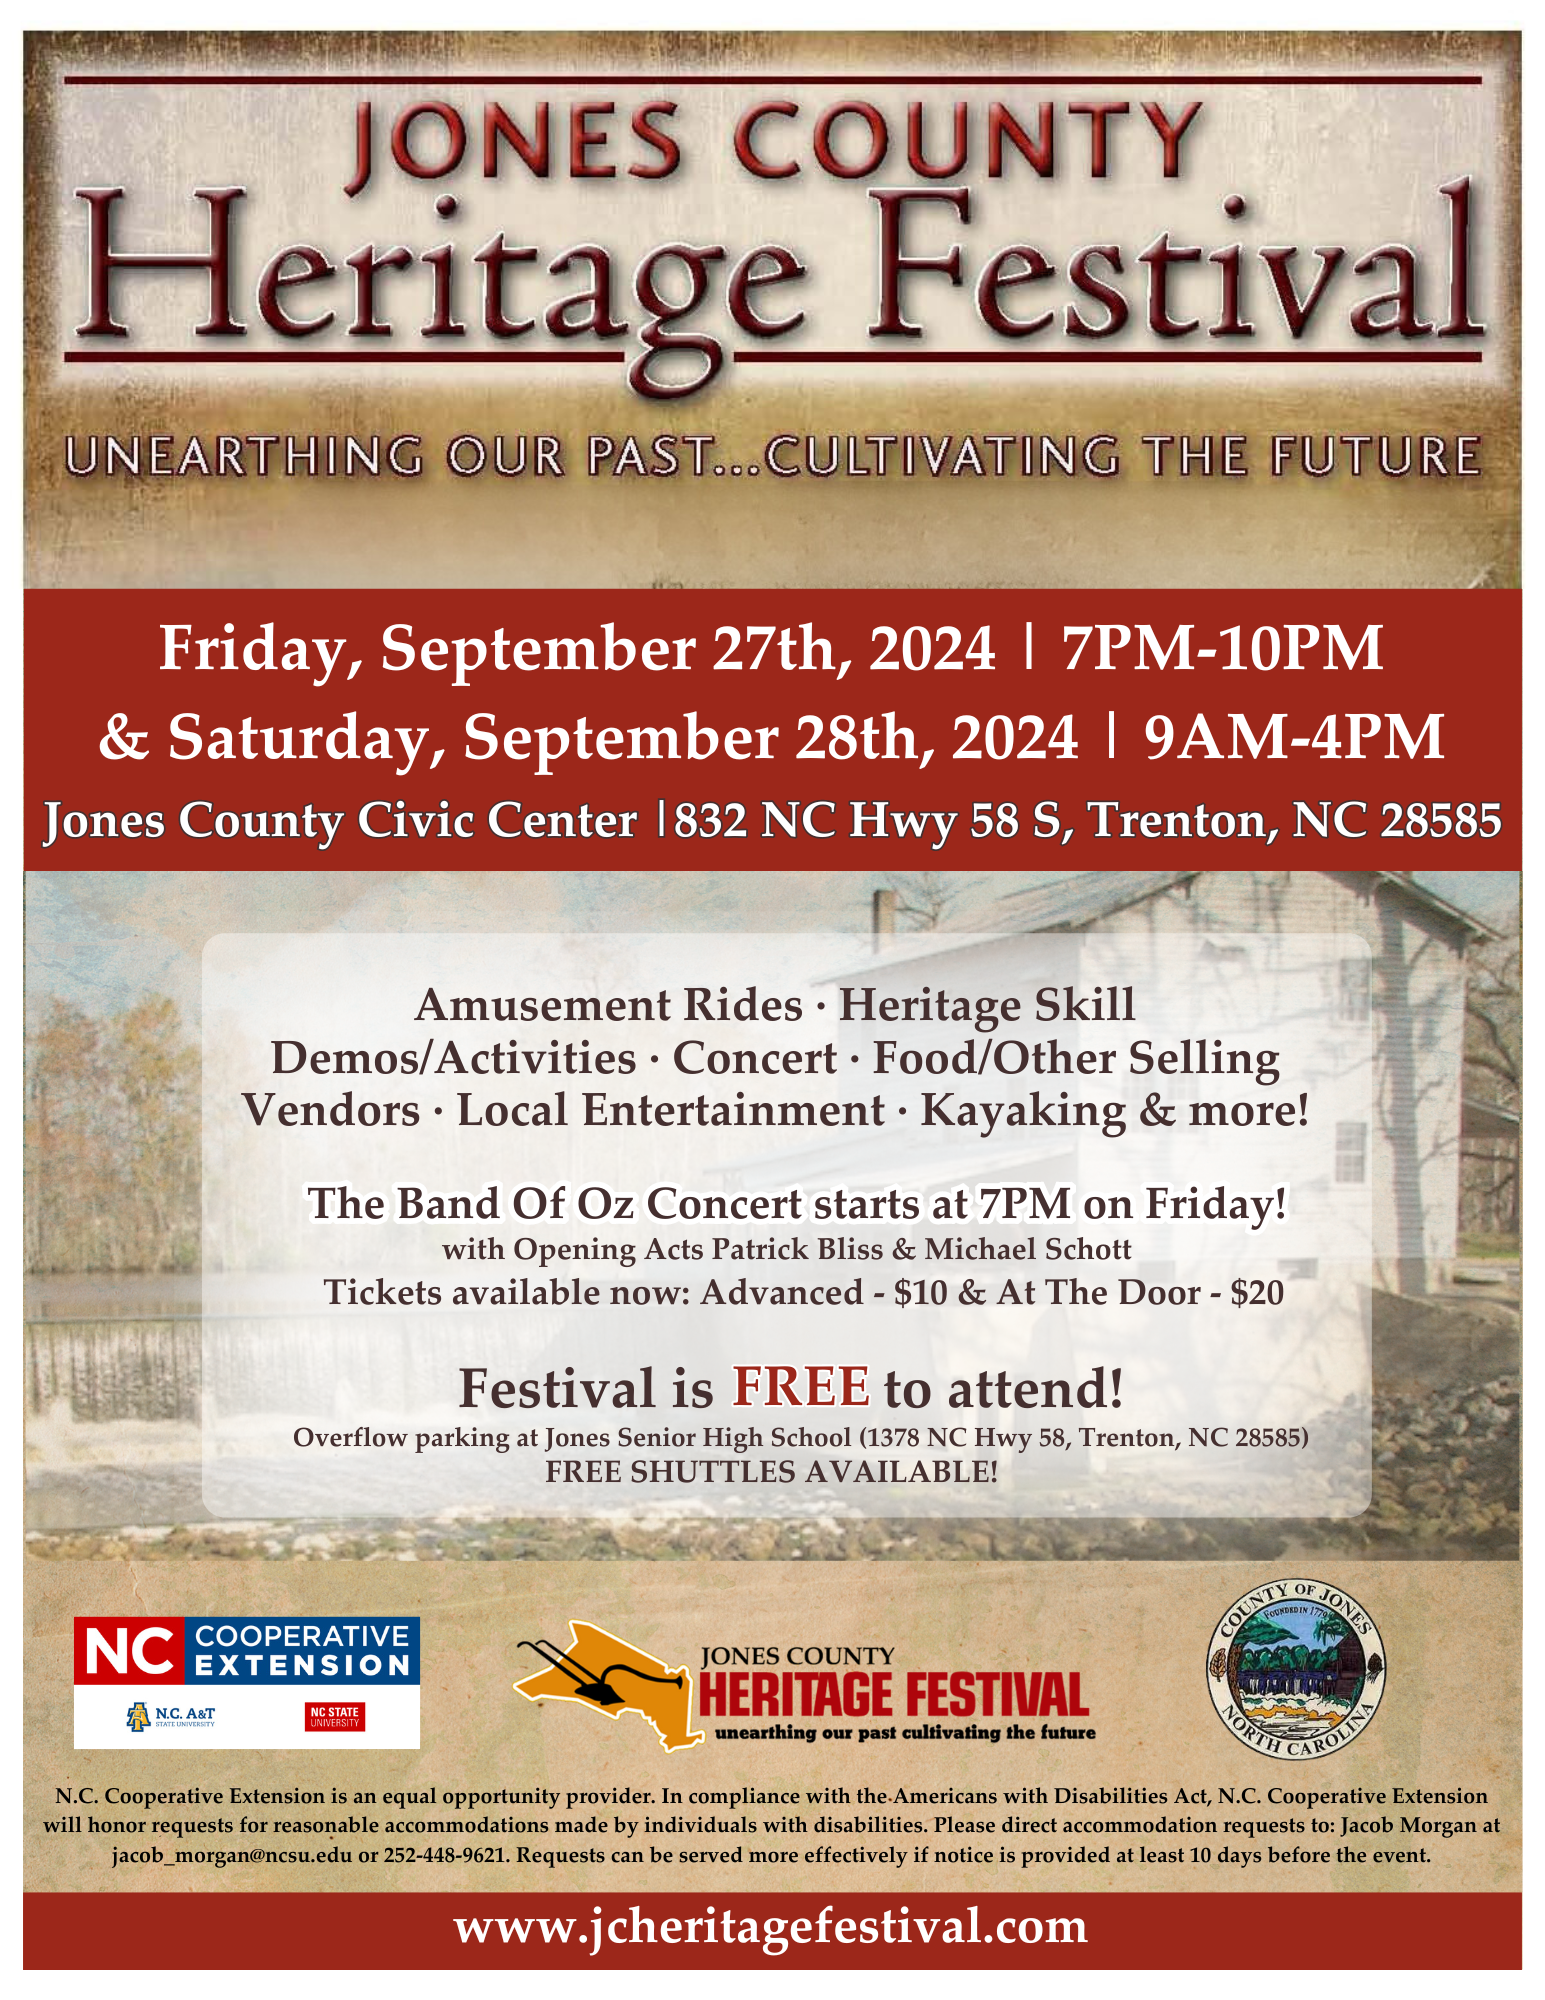 JONES COUNTY HERITAGE FESTIVAL! UNEARTHING OUR PAST.. CULTIVATING THE FUTURE. WHEN: FRIDAY, SEPTEMBER 27TH, 2024 7PM-10PM AND SATURDAY, SEPTEMBER 28TH, 2024 9AM-4PM WHERE: JONES COUNTY CIVIC CENTER, 832 NC HWY 58 S, TRENTON, NC 28585 AMUSEMENT RIDES, HERITAGE SKILL DEMOS/ACTIVITIES, CONCERT, FOOD/OTHER SELLING VENDORS, LOCAL ENTERTAINMENT, KAYAKING, AND MORE! THE BAND OF OZ CONCERTS STARTS AT 7PM ON FRIDAY! WITH OPENING ACTS PATRICK BLISS & MICHAEL SCHOTT. TICKETS AVAILABLE NOW: ADVANCED $10 & AT THE DOOR $20 FESTIVAL IS FREE TO ATTEND OVERFLOW PARKING AT JONES SENIOR HIGH SCHOOL (1378 NC HWY 58, TRENTON, NC 28585) FREE SHUTTLES AVAILABLE!